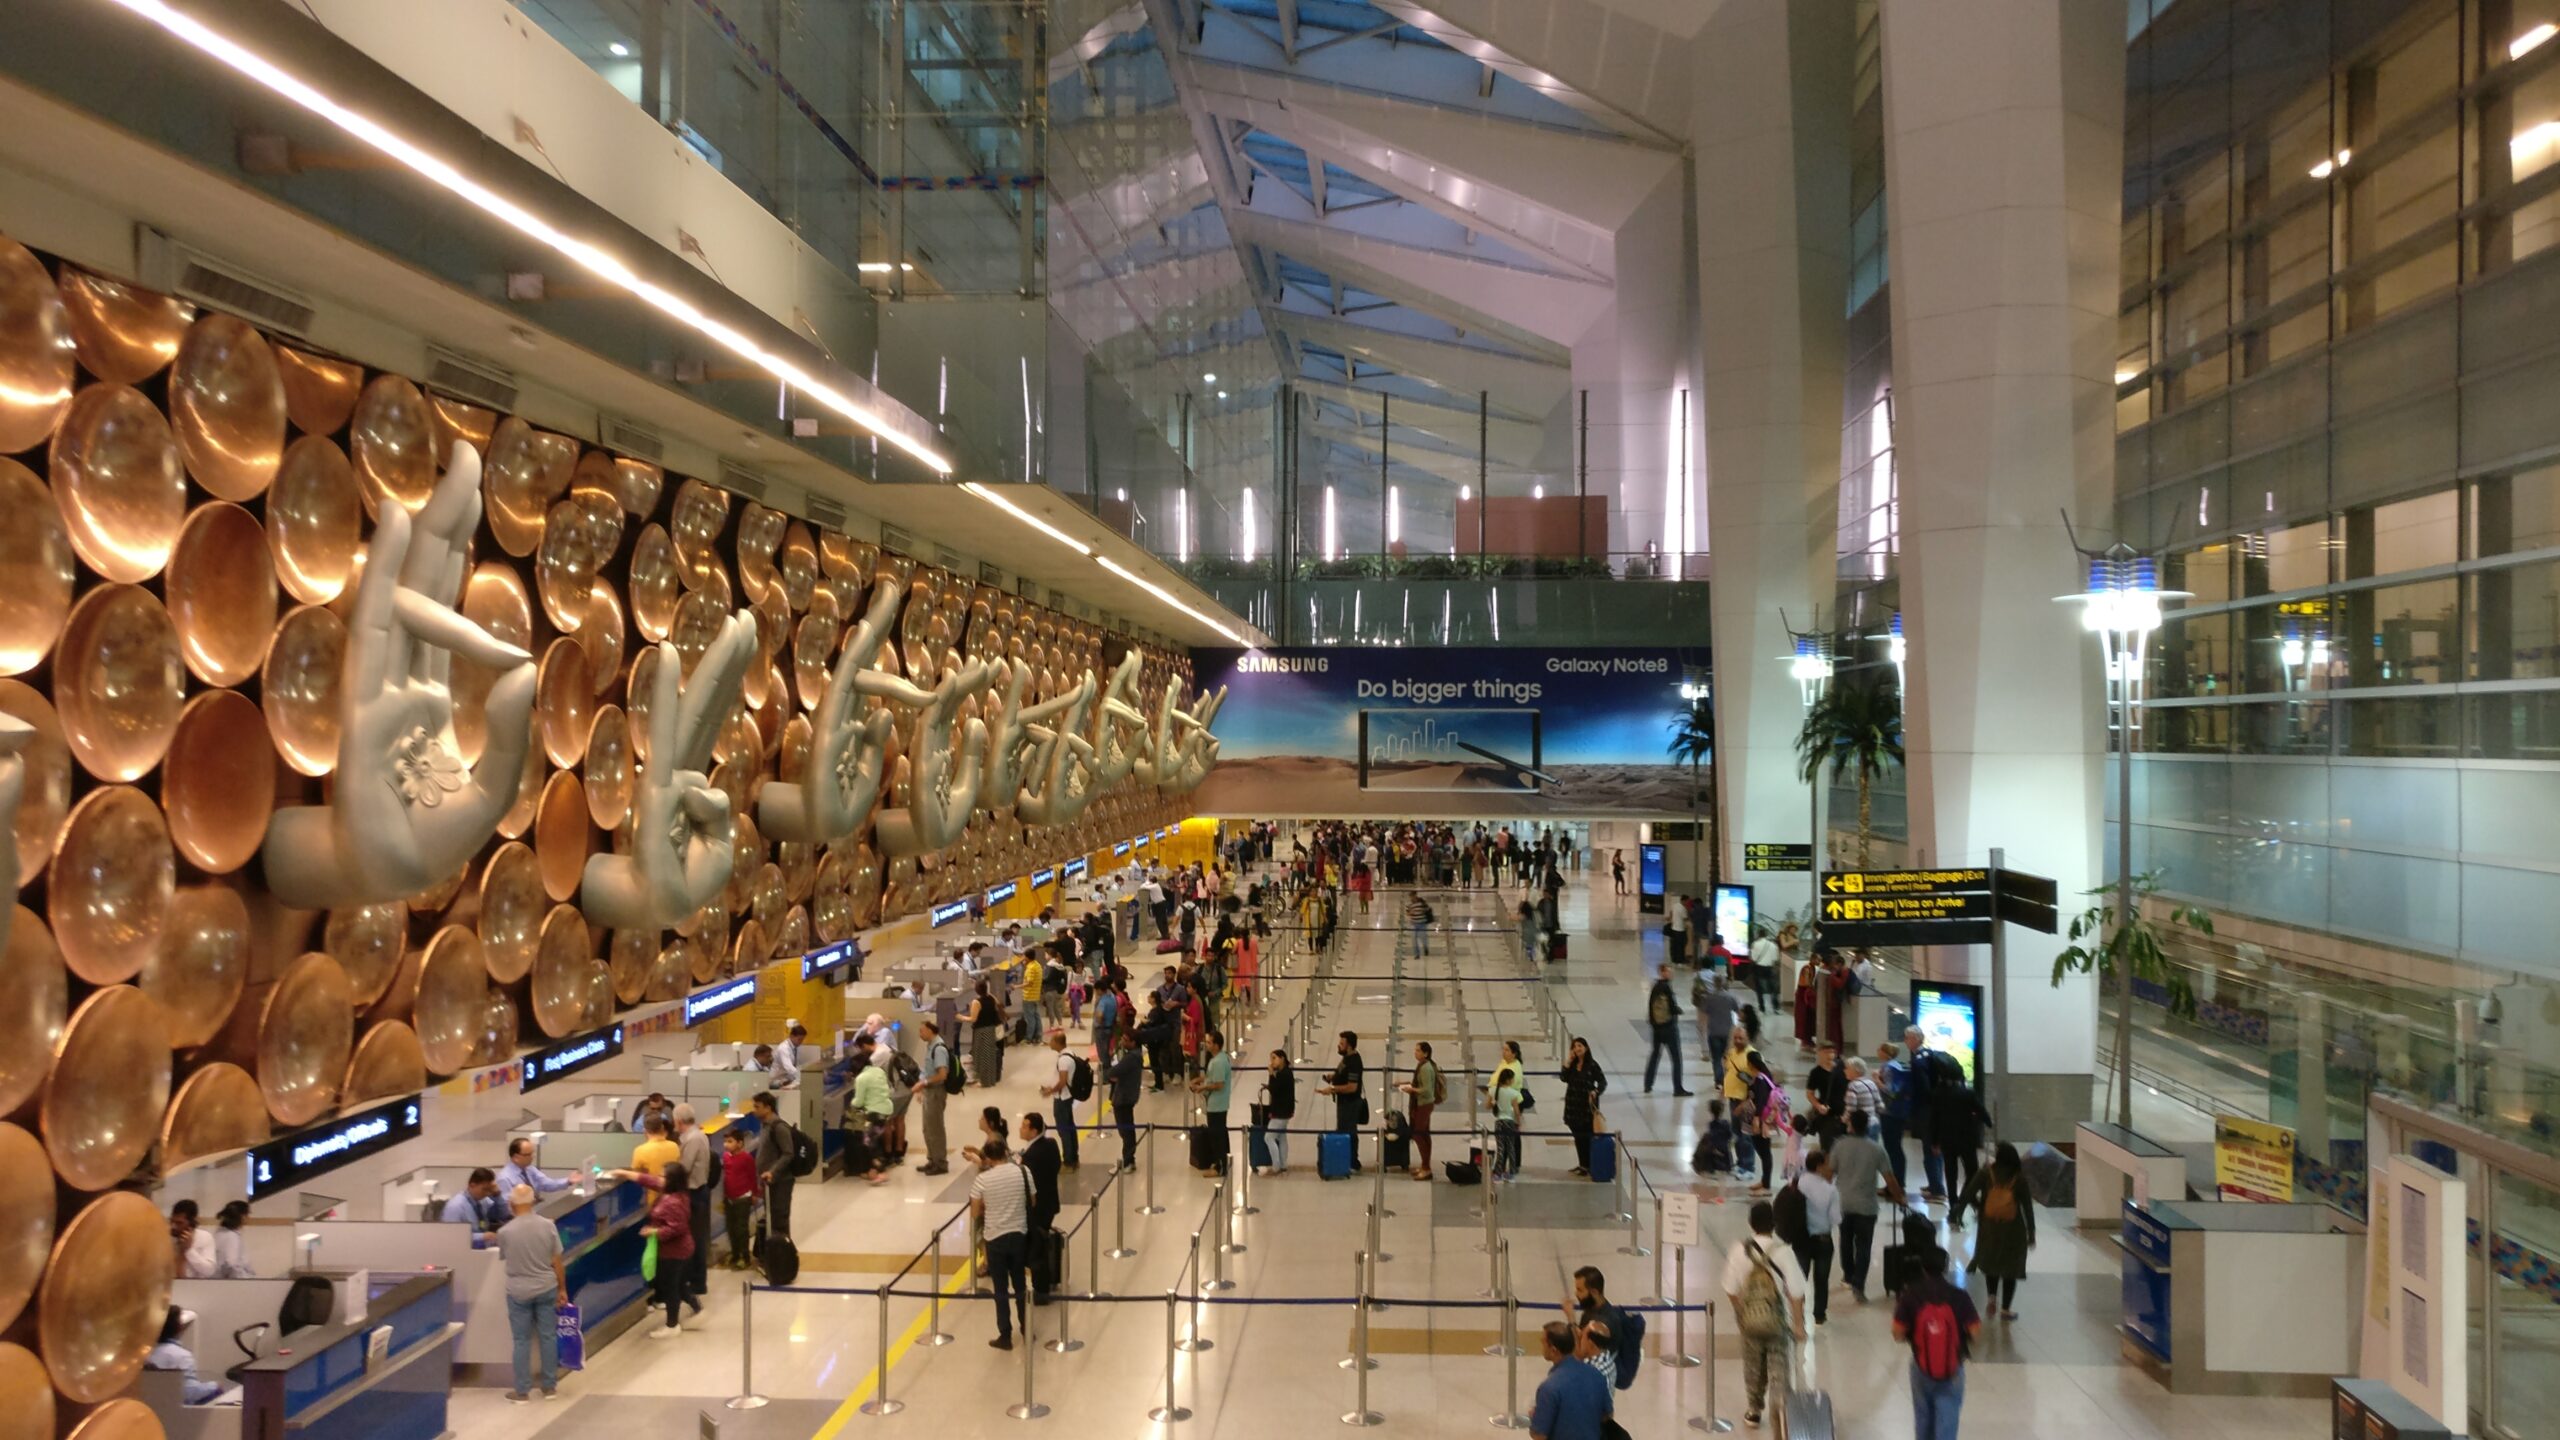 Delhi’s IGI airport is now the second busiest airport in the world